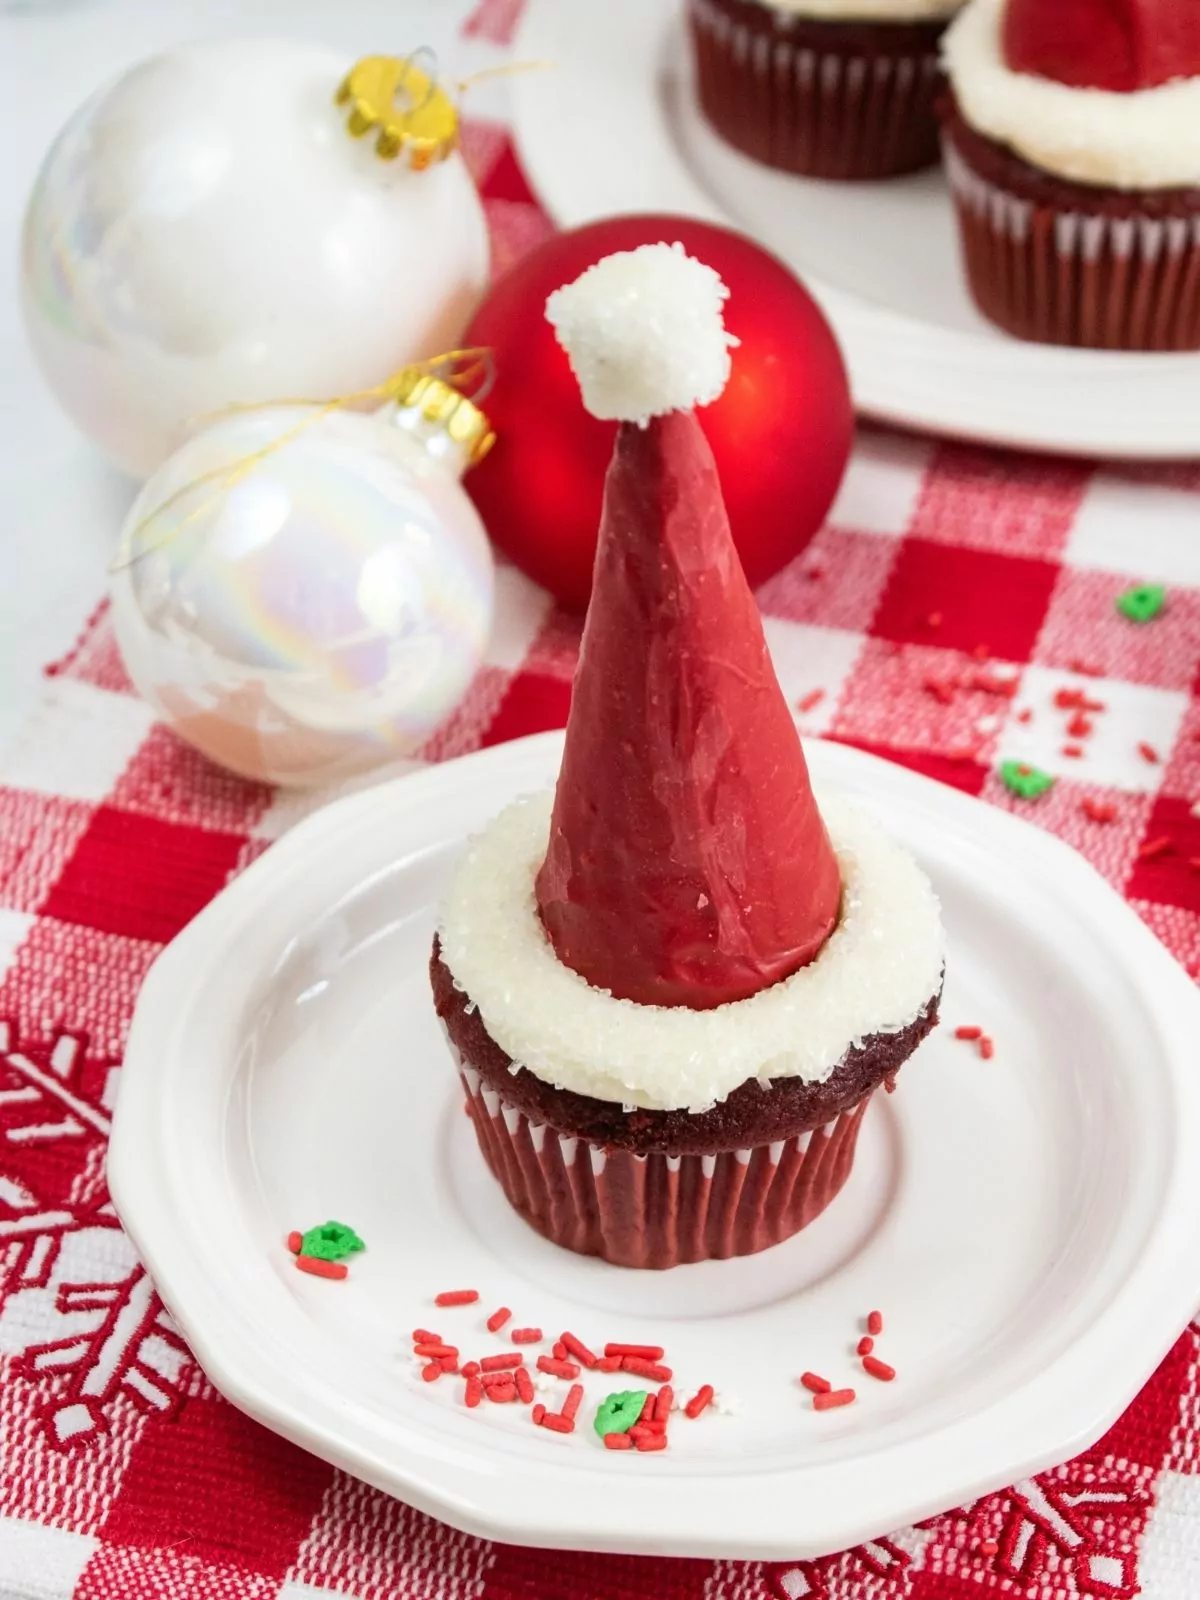 Santa hat cupcake on white plate with red checked placemat underneath.